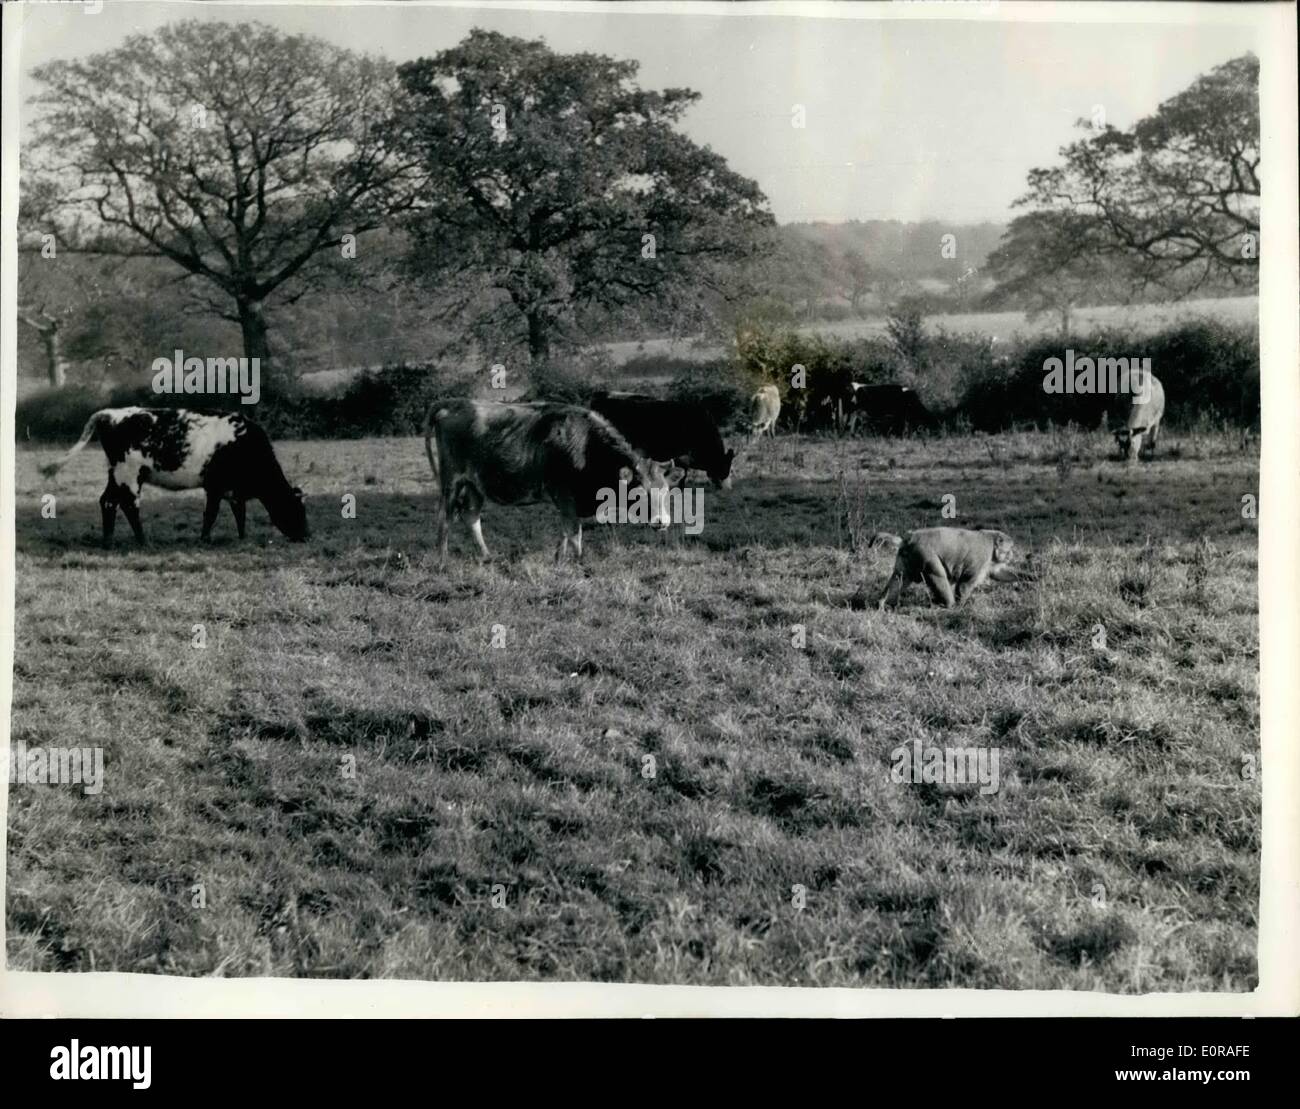 Nov. 11, 1958 - The Monkey Cowboy Self appointed boss of a herd of 34 cattle on a farm at Henfield, Sussex, is Ginger - a 2 ft. Stock Photo